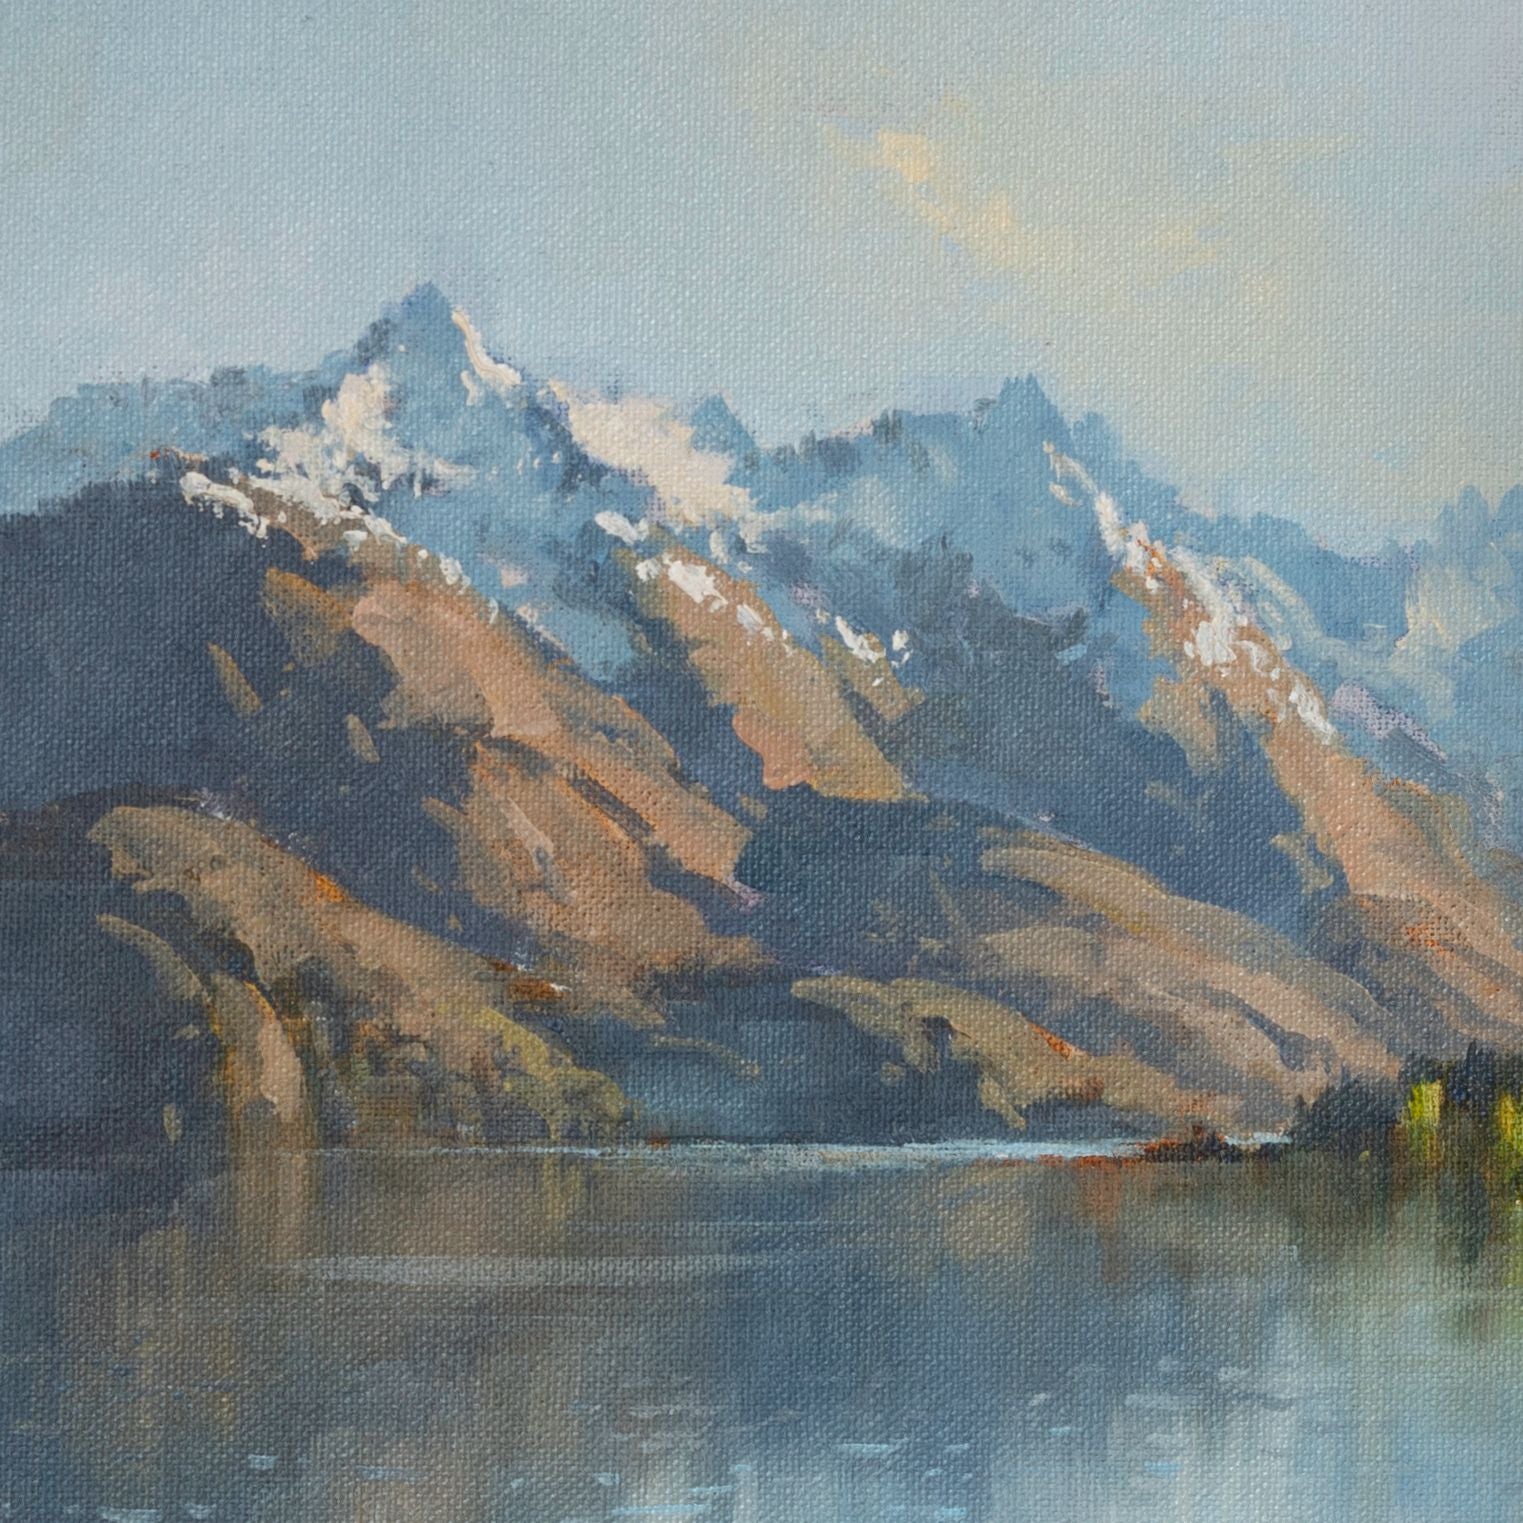 Partial detail of Oil Painting by renowned landscape artist Neil J Bartlett of Lake Wanaka near Queenstown Silver Fern Gallery